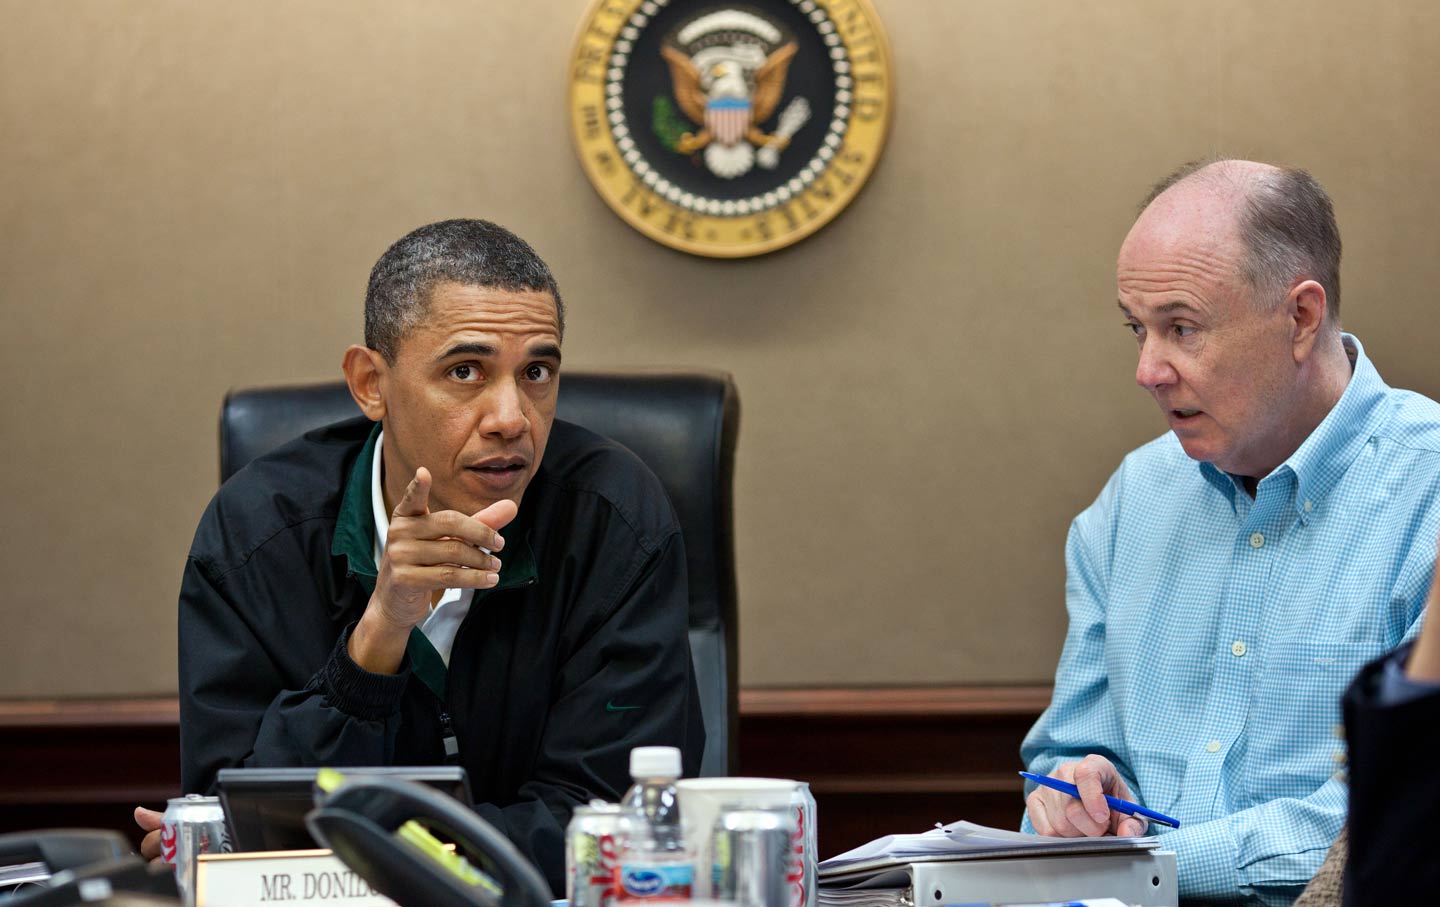 Obama in the Situation Room